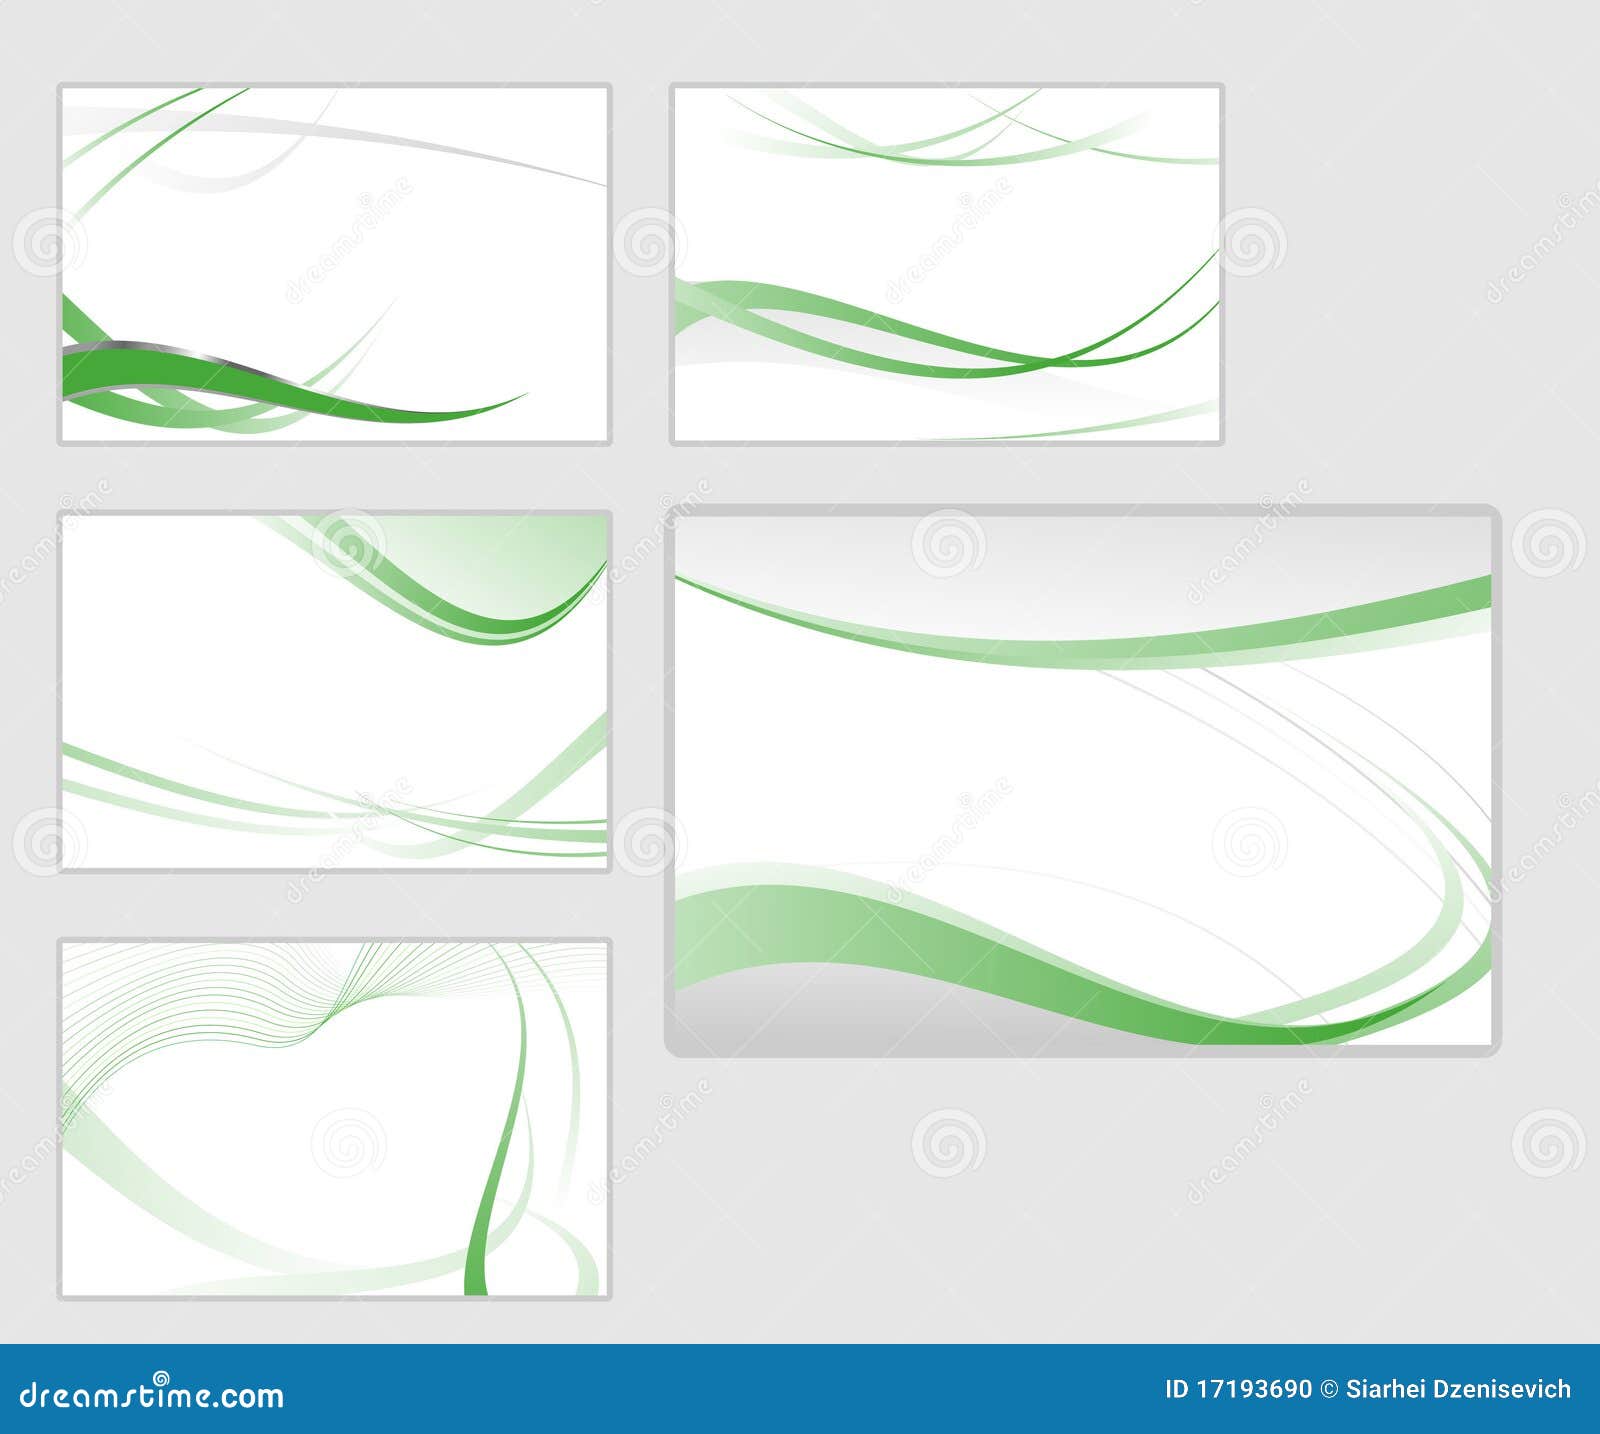 clipart for business cards - photo #10